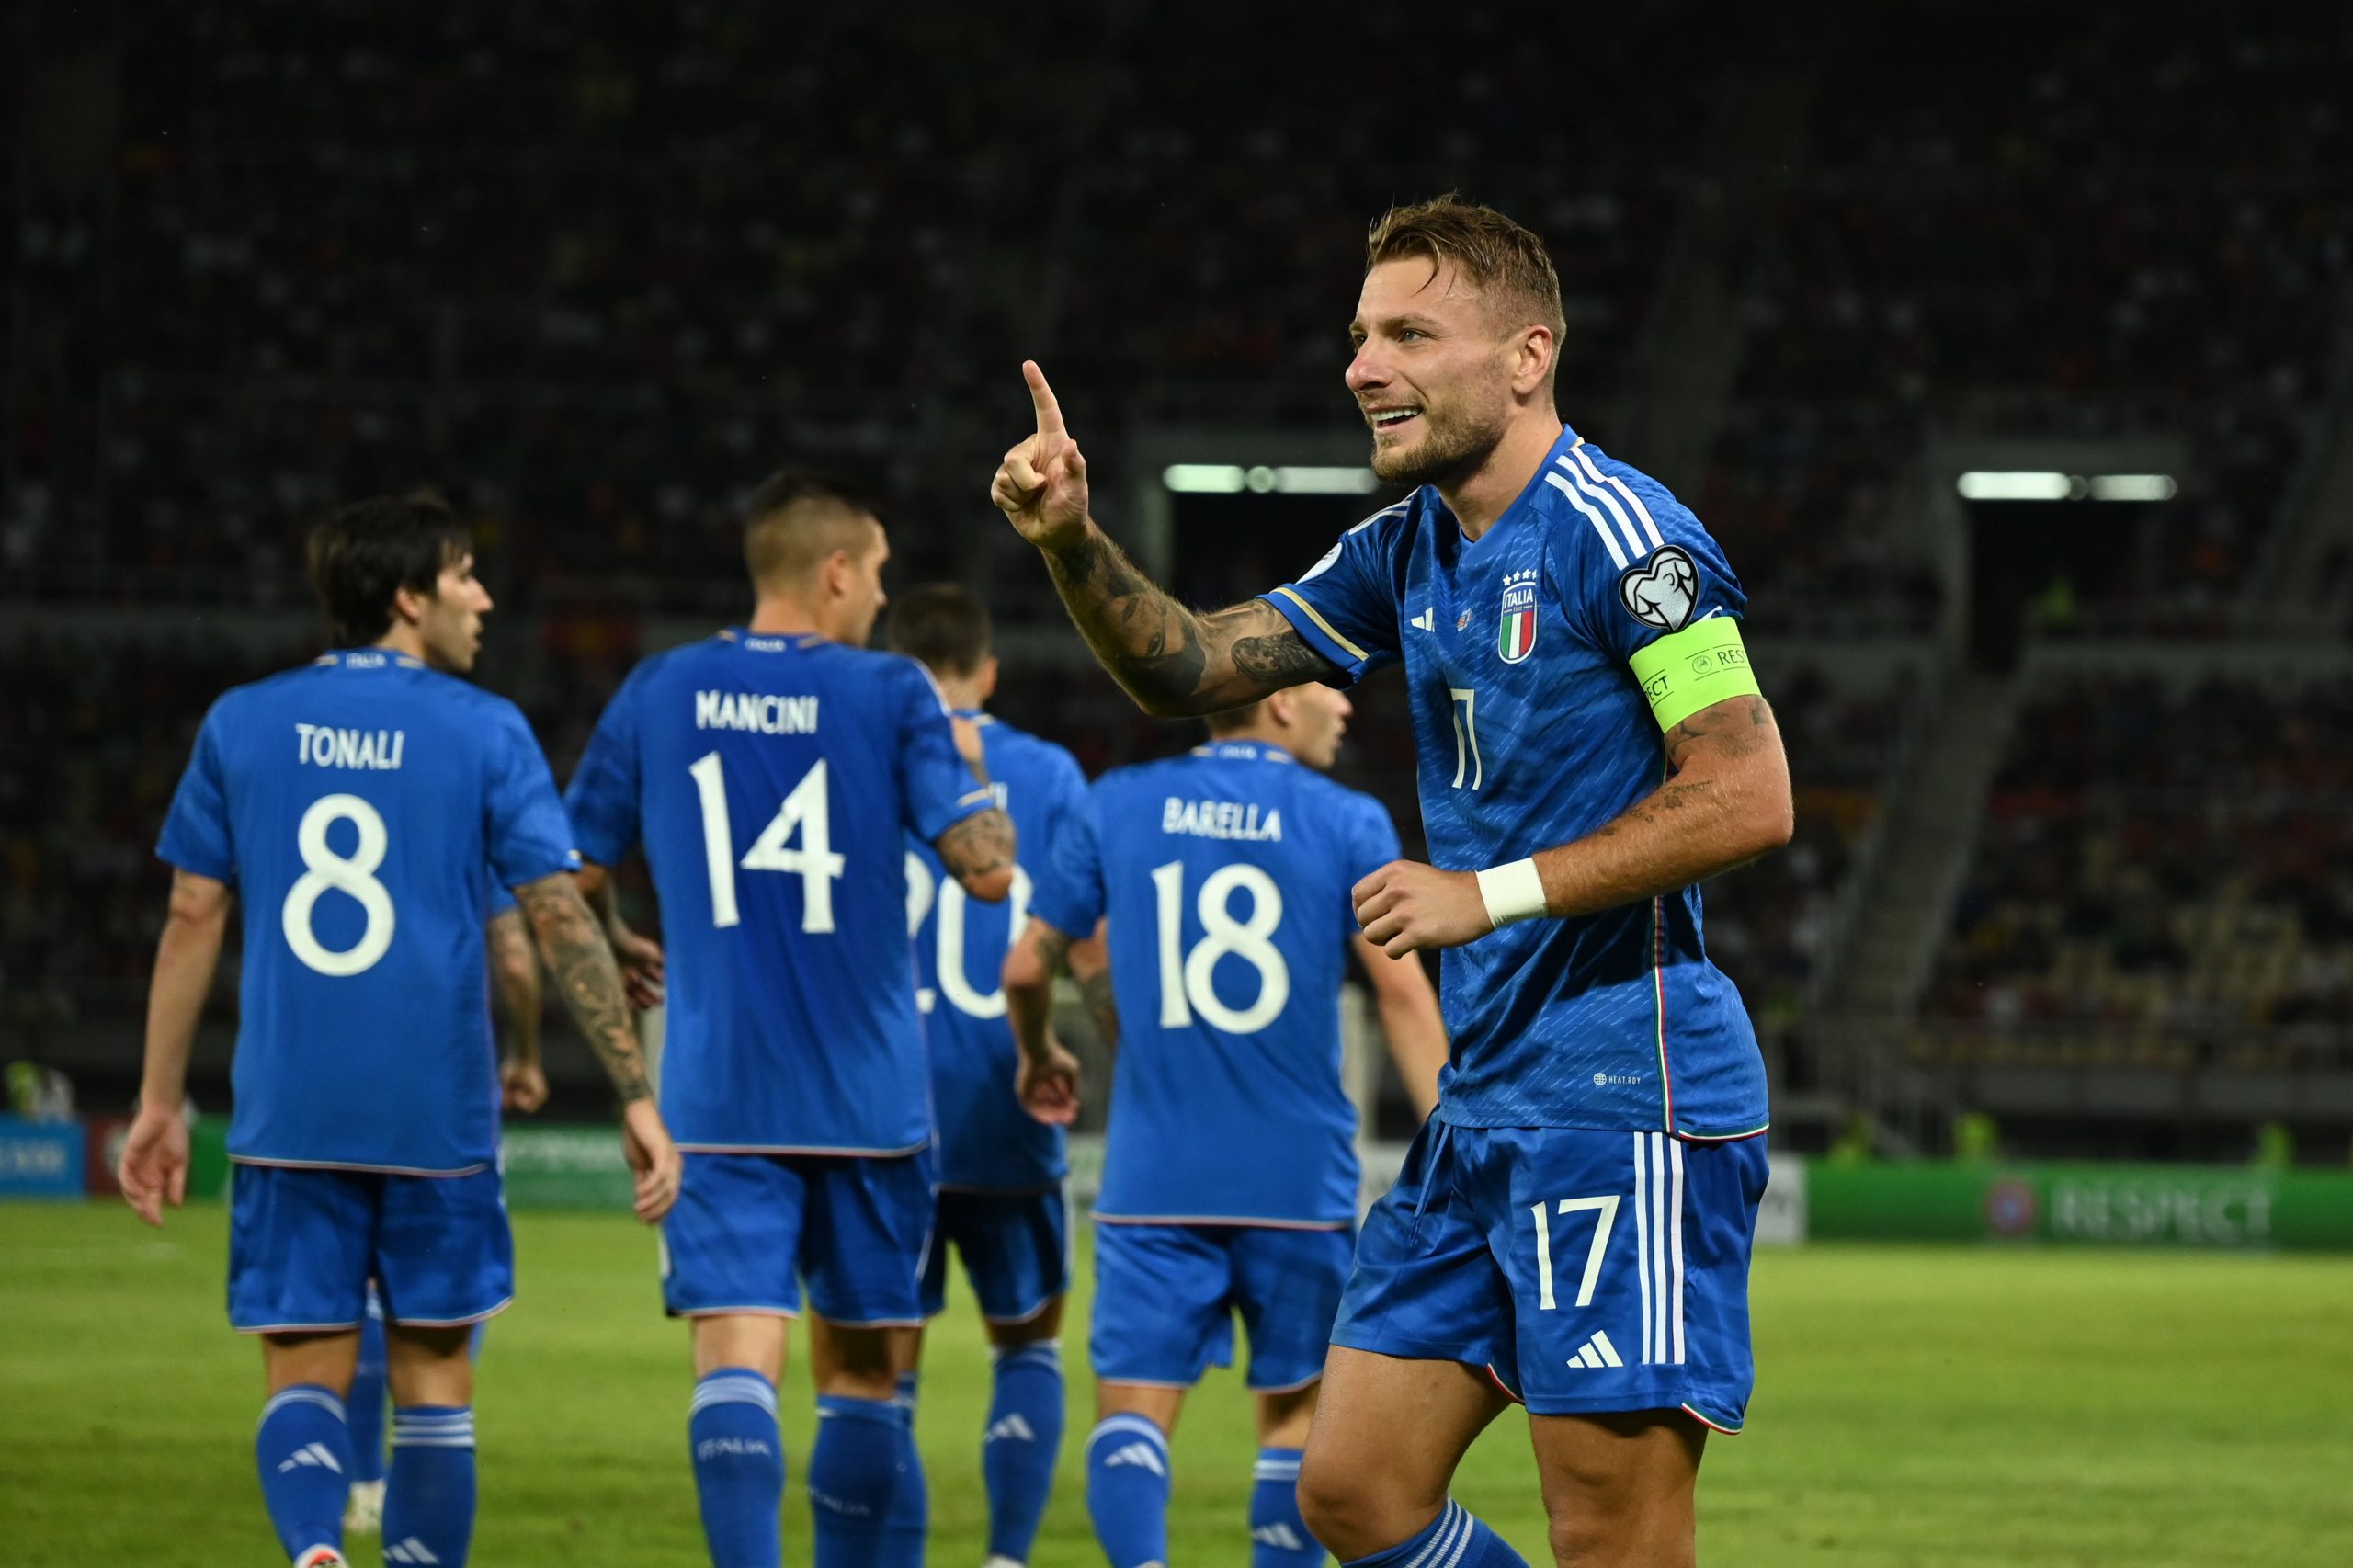 Italy-Ukraine: free streaming, TV channel and compositions